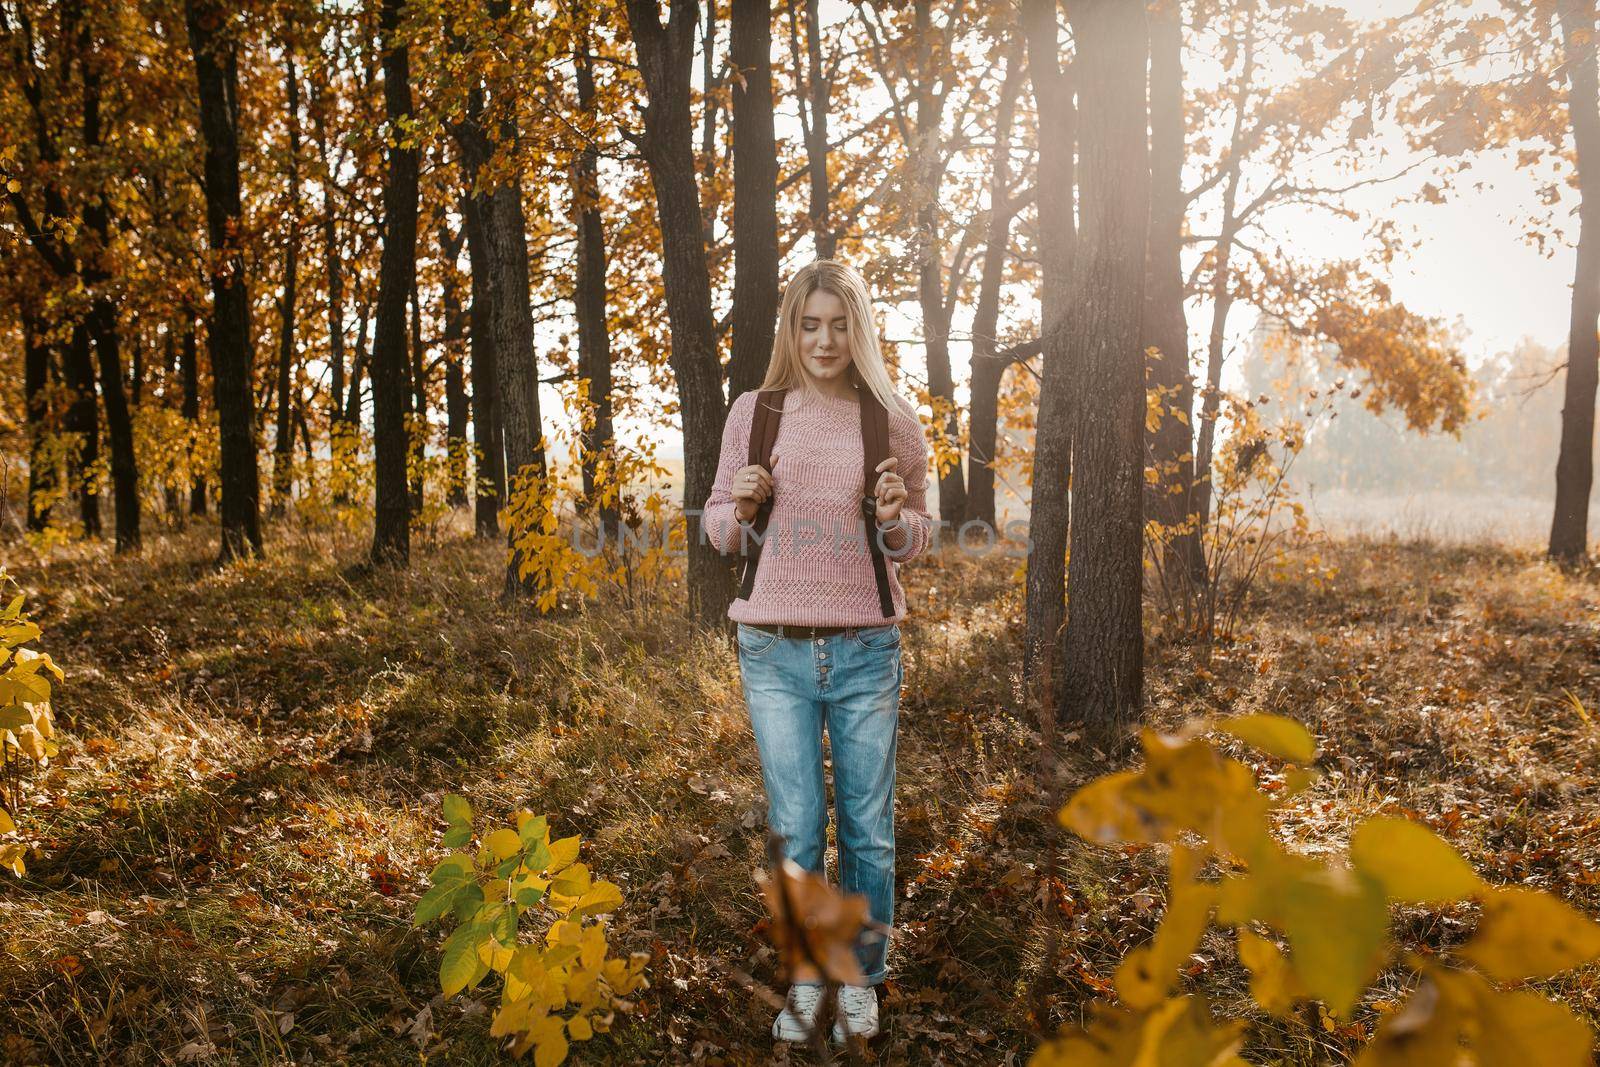 Female tourist with a backpack Stopped in a sunny autumn forest, young woman stands admiring the beauty of nature by LipikStockMedia